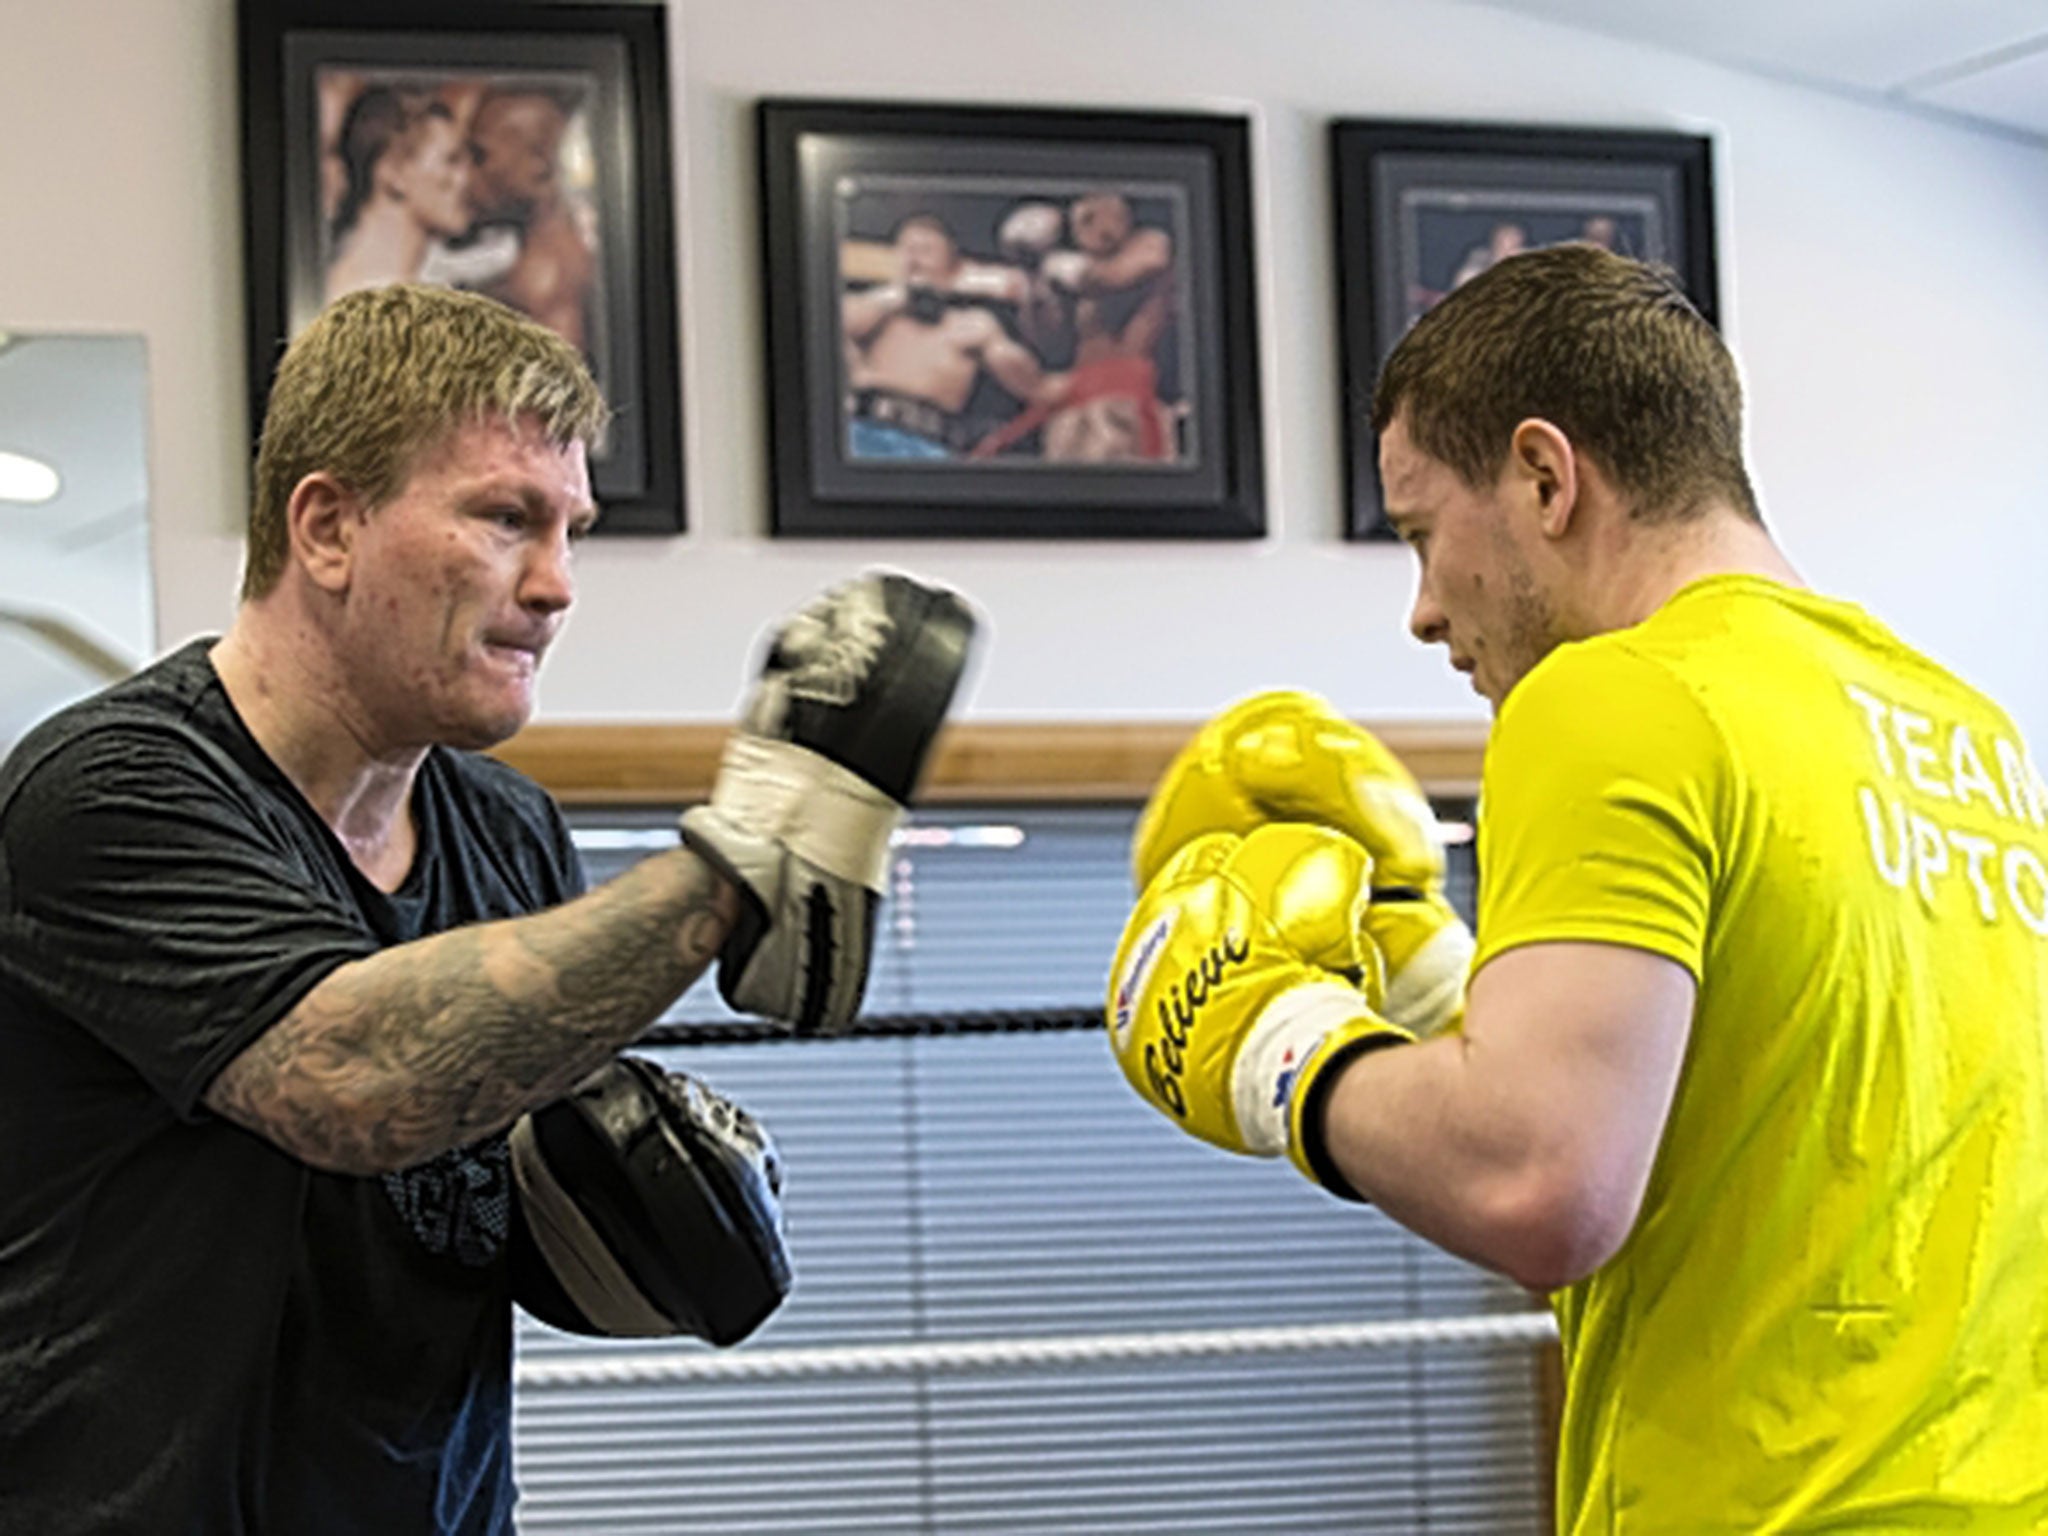 Ricky Hatton still spars in his gym, but a heavy defeat in 2012 put paid to any thoughts of a further comeback